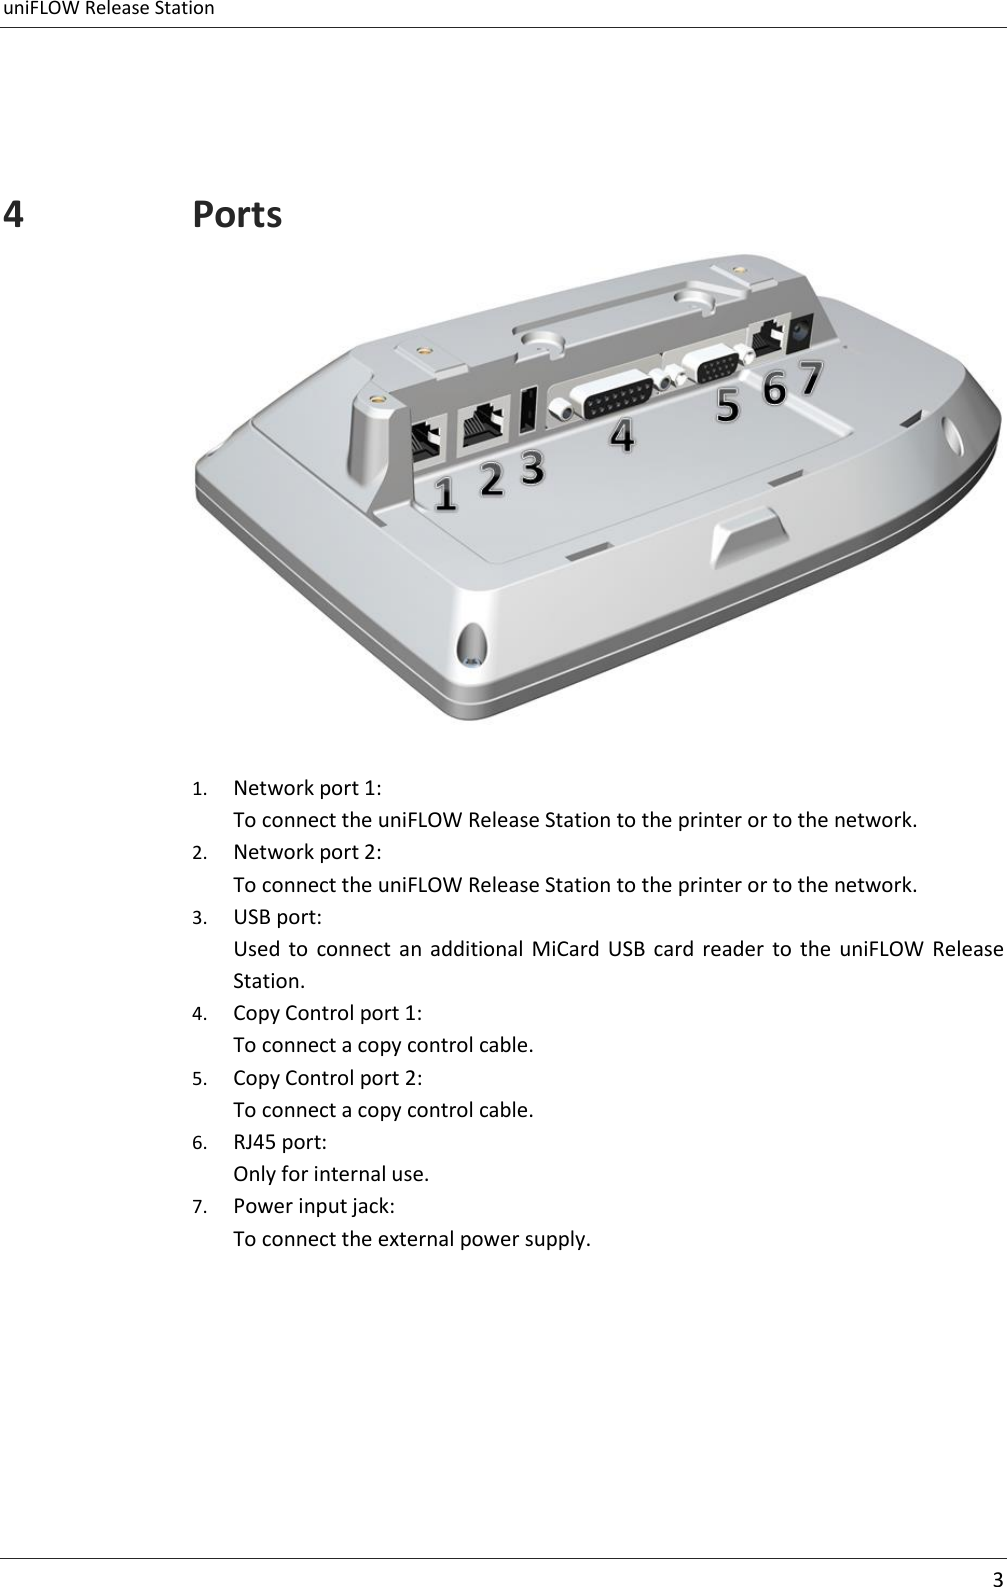 uniFLOW Release Station      3    4 Ports   1. Network port 1: To connect the uniFLOW Release Station to the printer or to the network. 2. Network port 2: To connect the uniFLOW Release Station to the printer or to the network. 3. USB port: Used  to  connect  an  additional MiCard  USB  card  reader  to  the  uniFLOW Release Station. 4. Copy Control port 1: To connect a copy control cable. 5. Copy Control port 2: To connect a copy control cable. 6. RJ45 port: Only for internal use. 7. Power input jack: To connect the external power supply. 